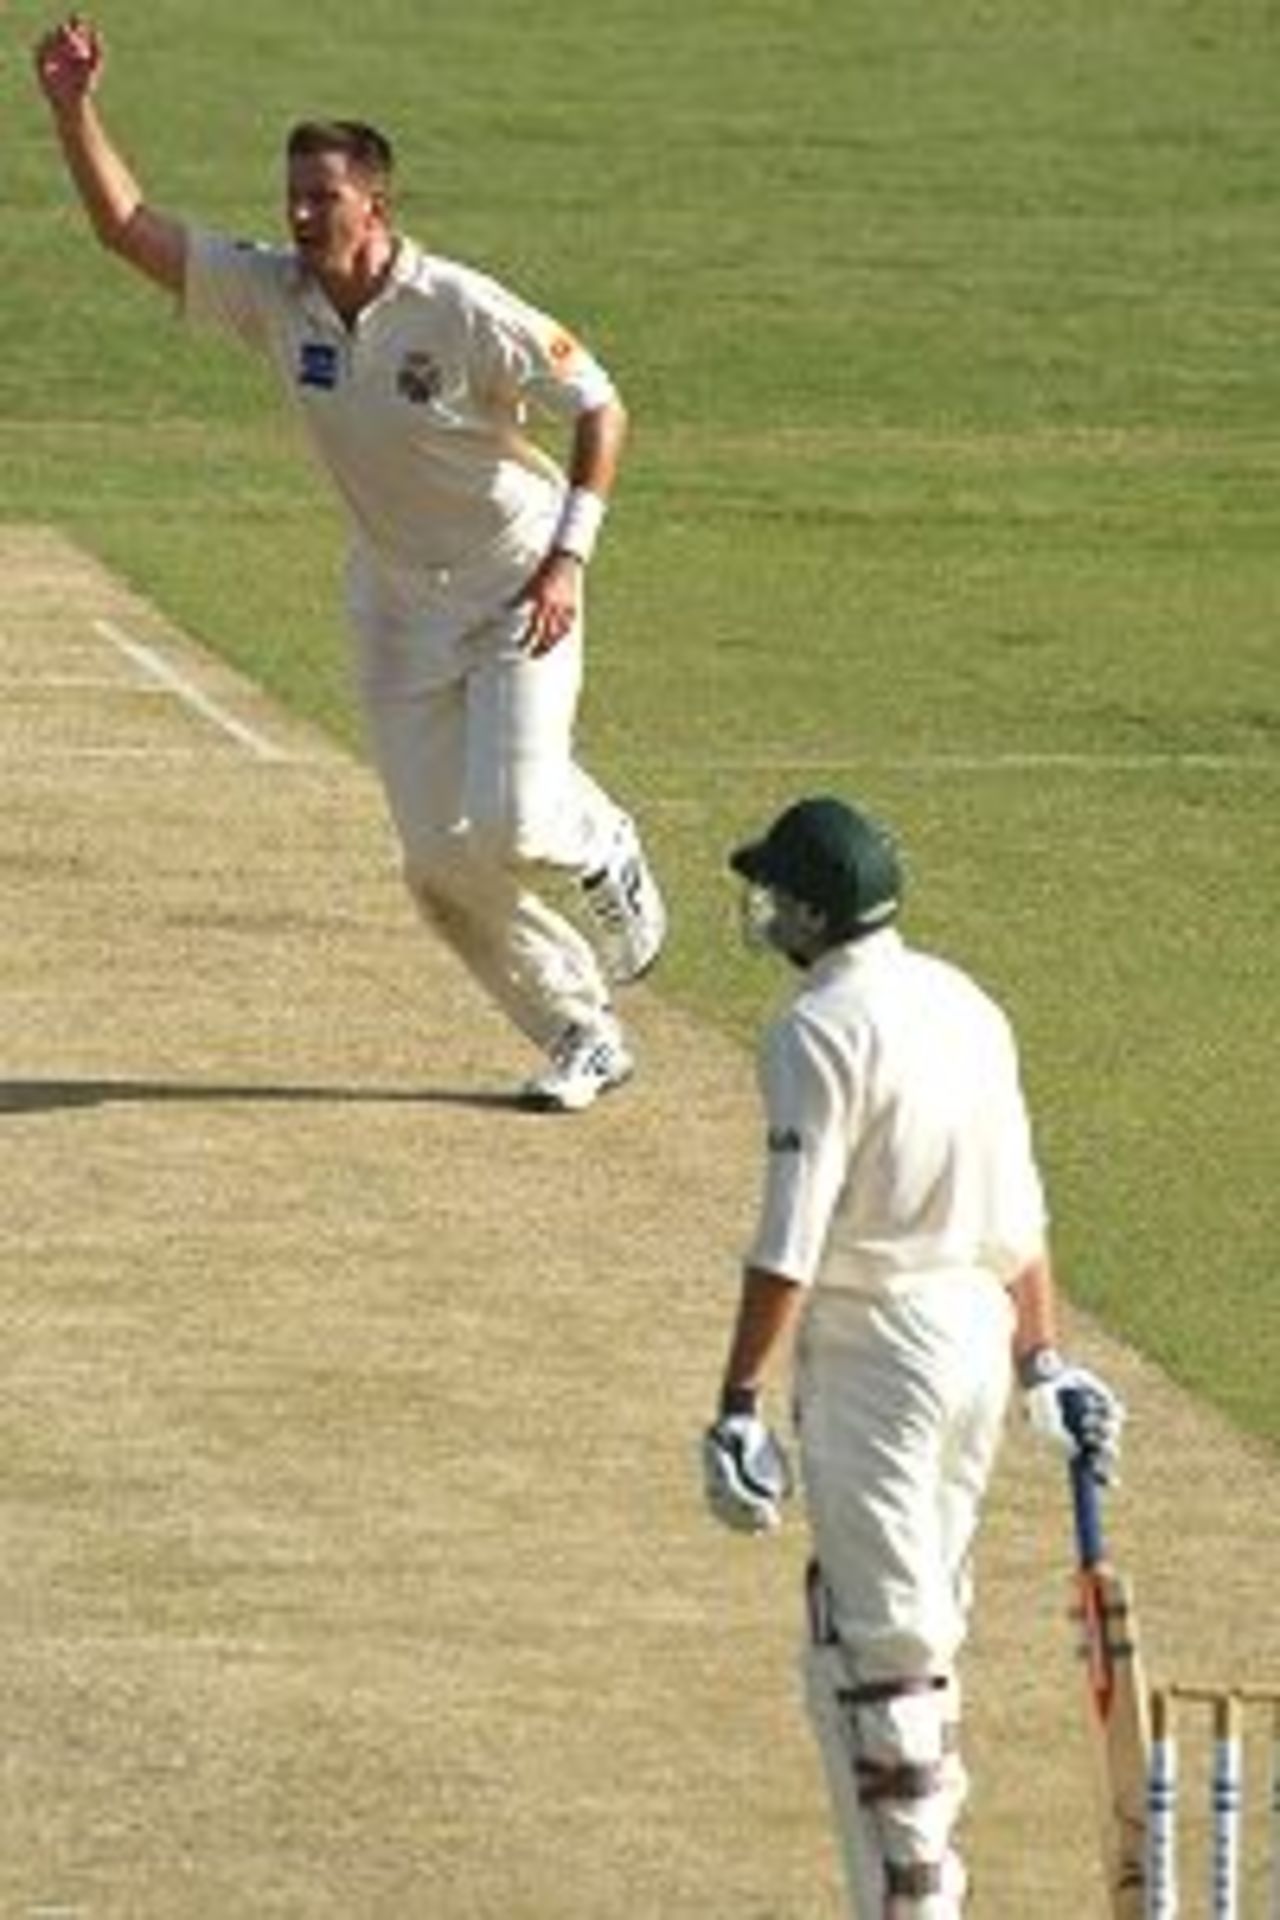 23 Mar 2002: Michael Kasprowicz of Queensland celebrates as he claims the wicket of Scott Kremerskothen of Tasmania, caught by substitute fieldsman, Clinton Perren for ten, during day two of the Pura Cup Final between the Queensland Bulls and the Tasmania Tigers, played at the Gabba, Brisbane, Australia.